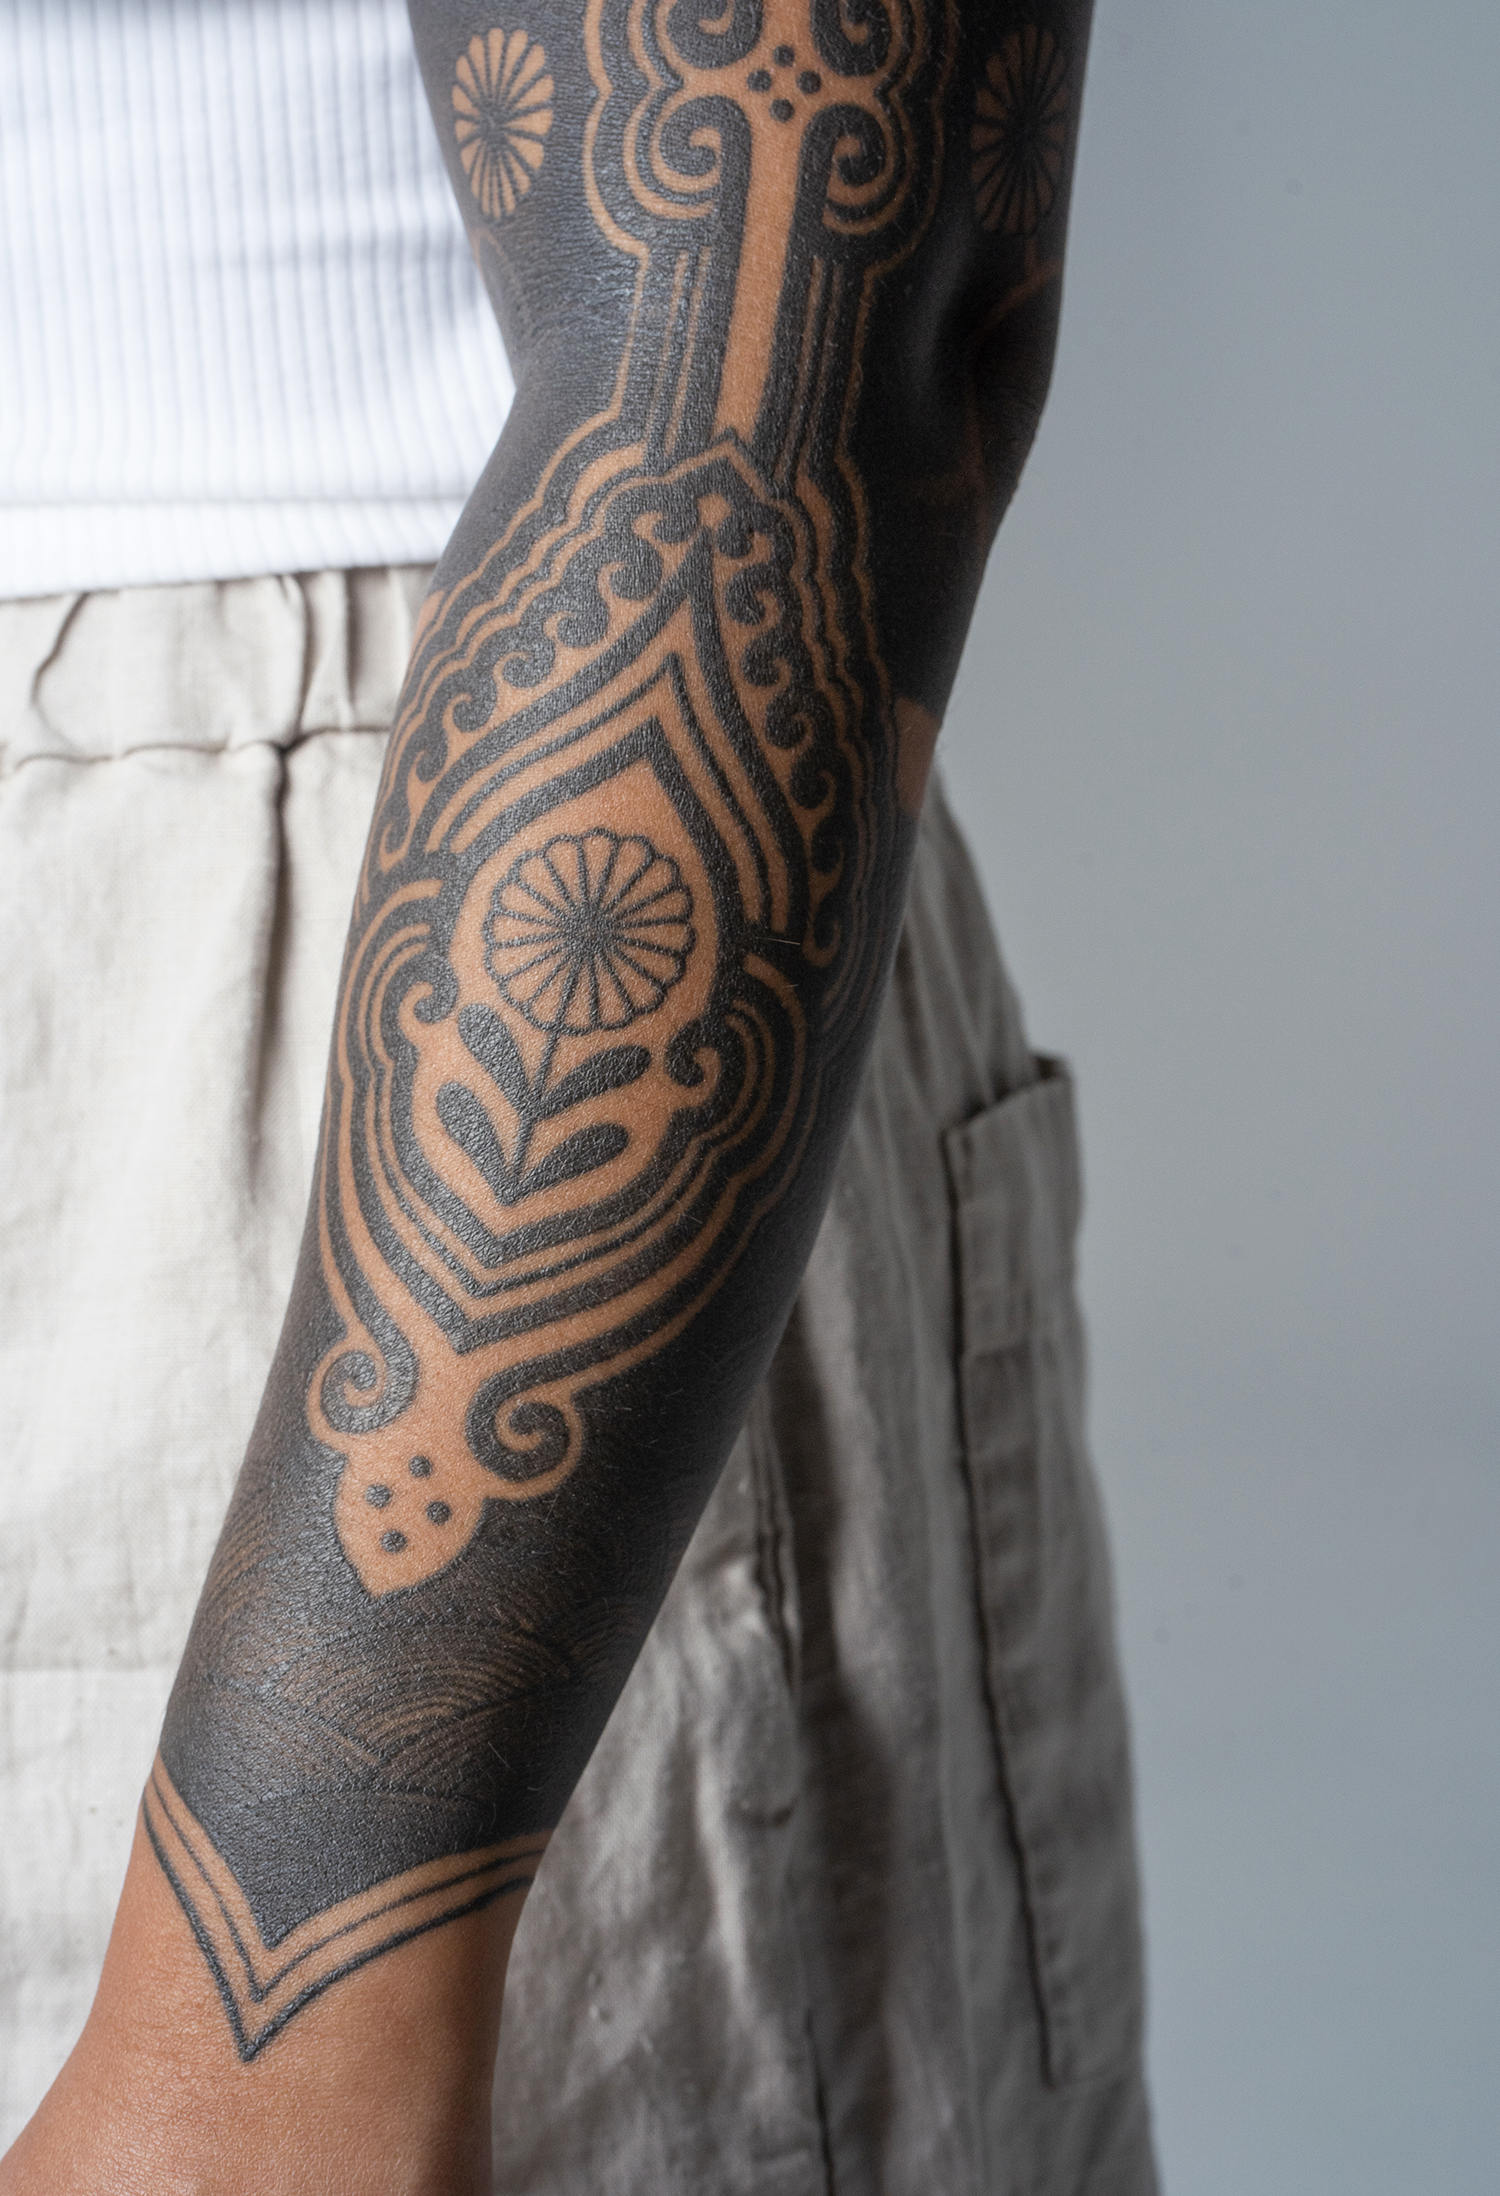 A part of a tattooed sleeve detail emanates exquisite beauty up close